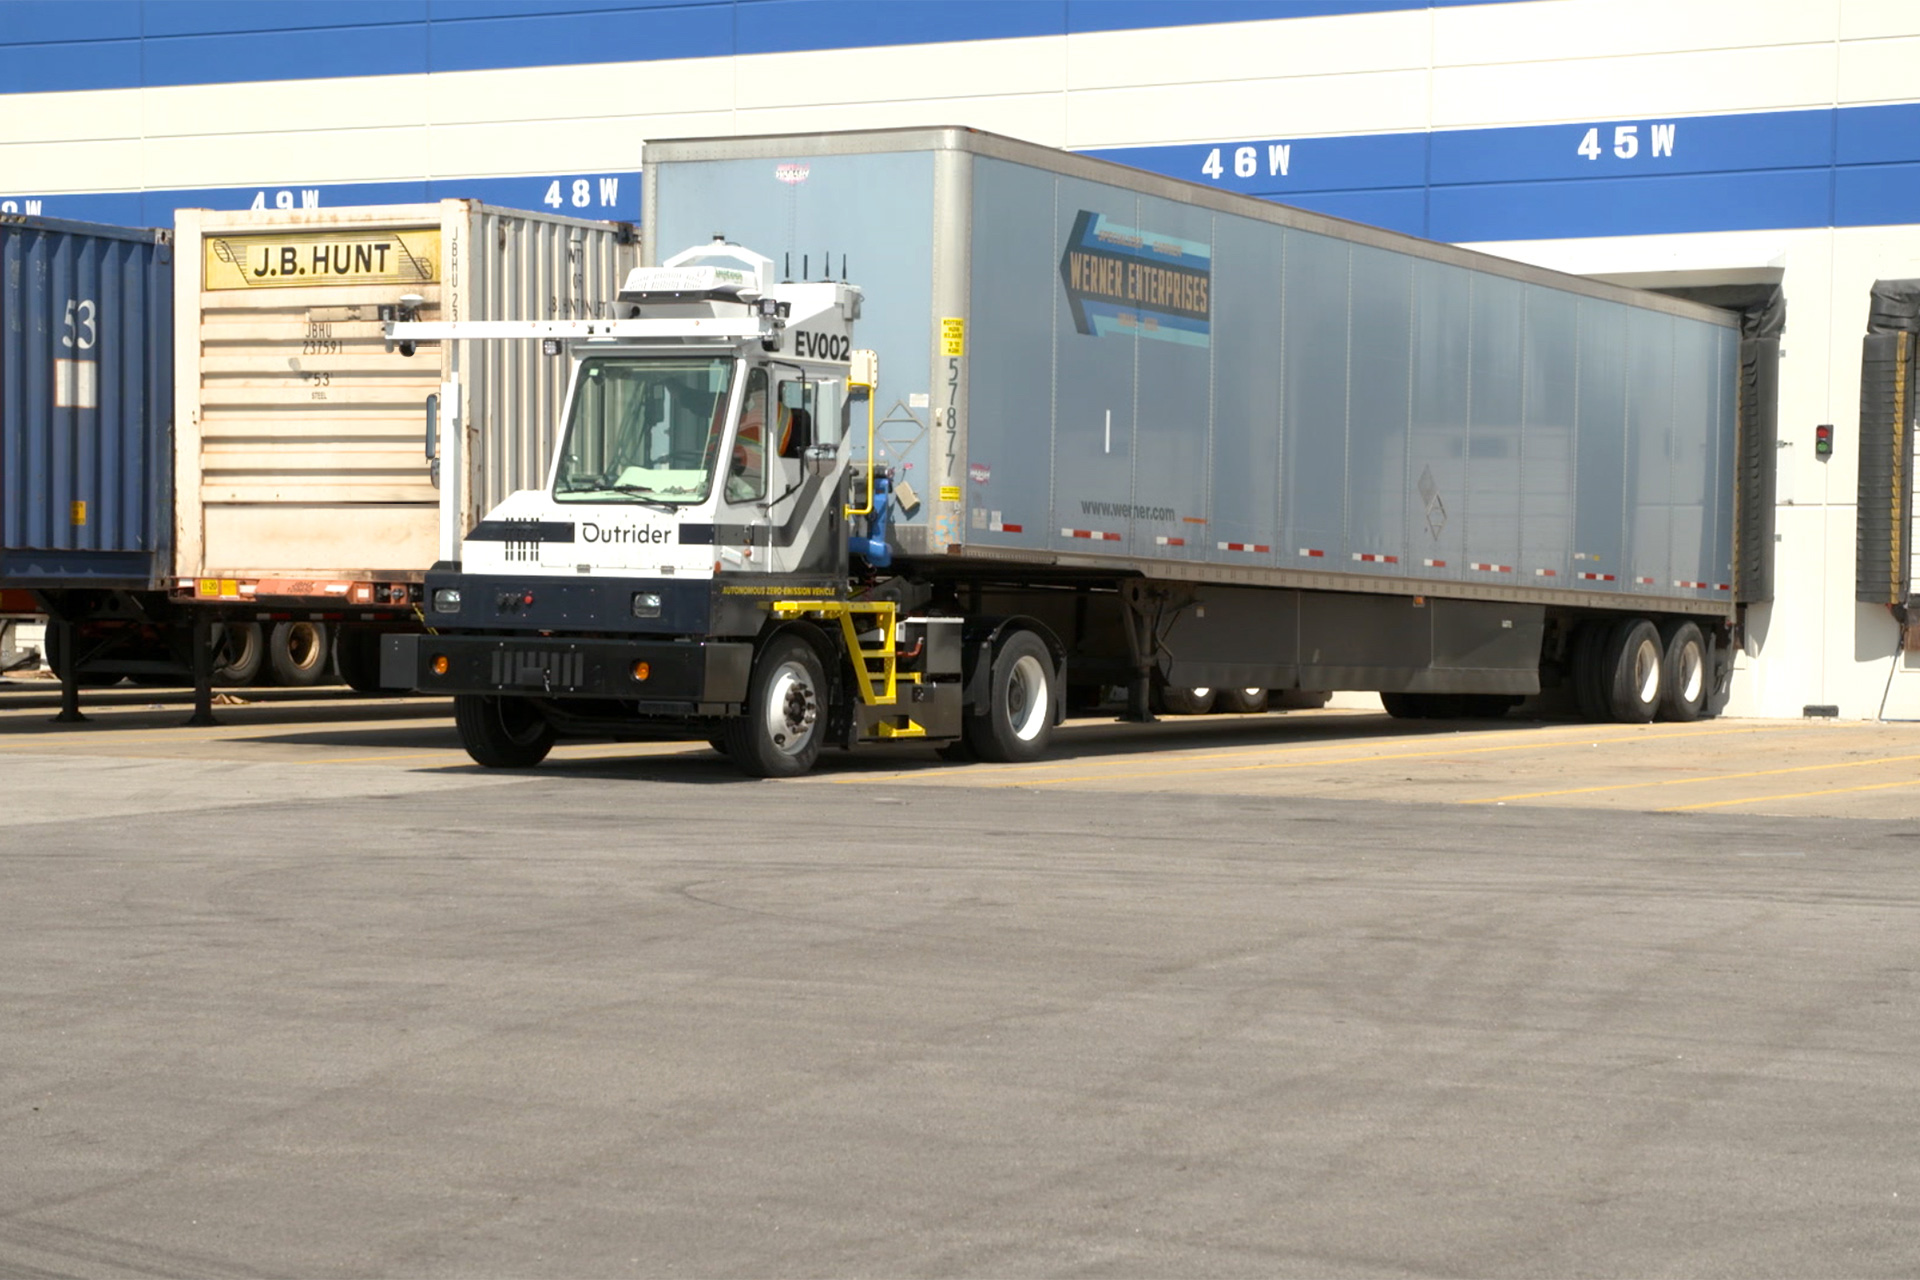 The Outrider System autonomously moves trailers to and from loading docks and parking spots.